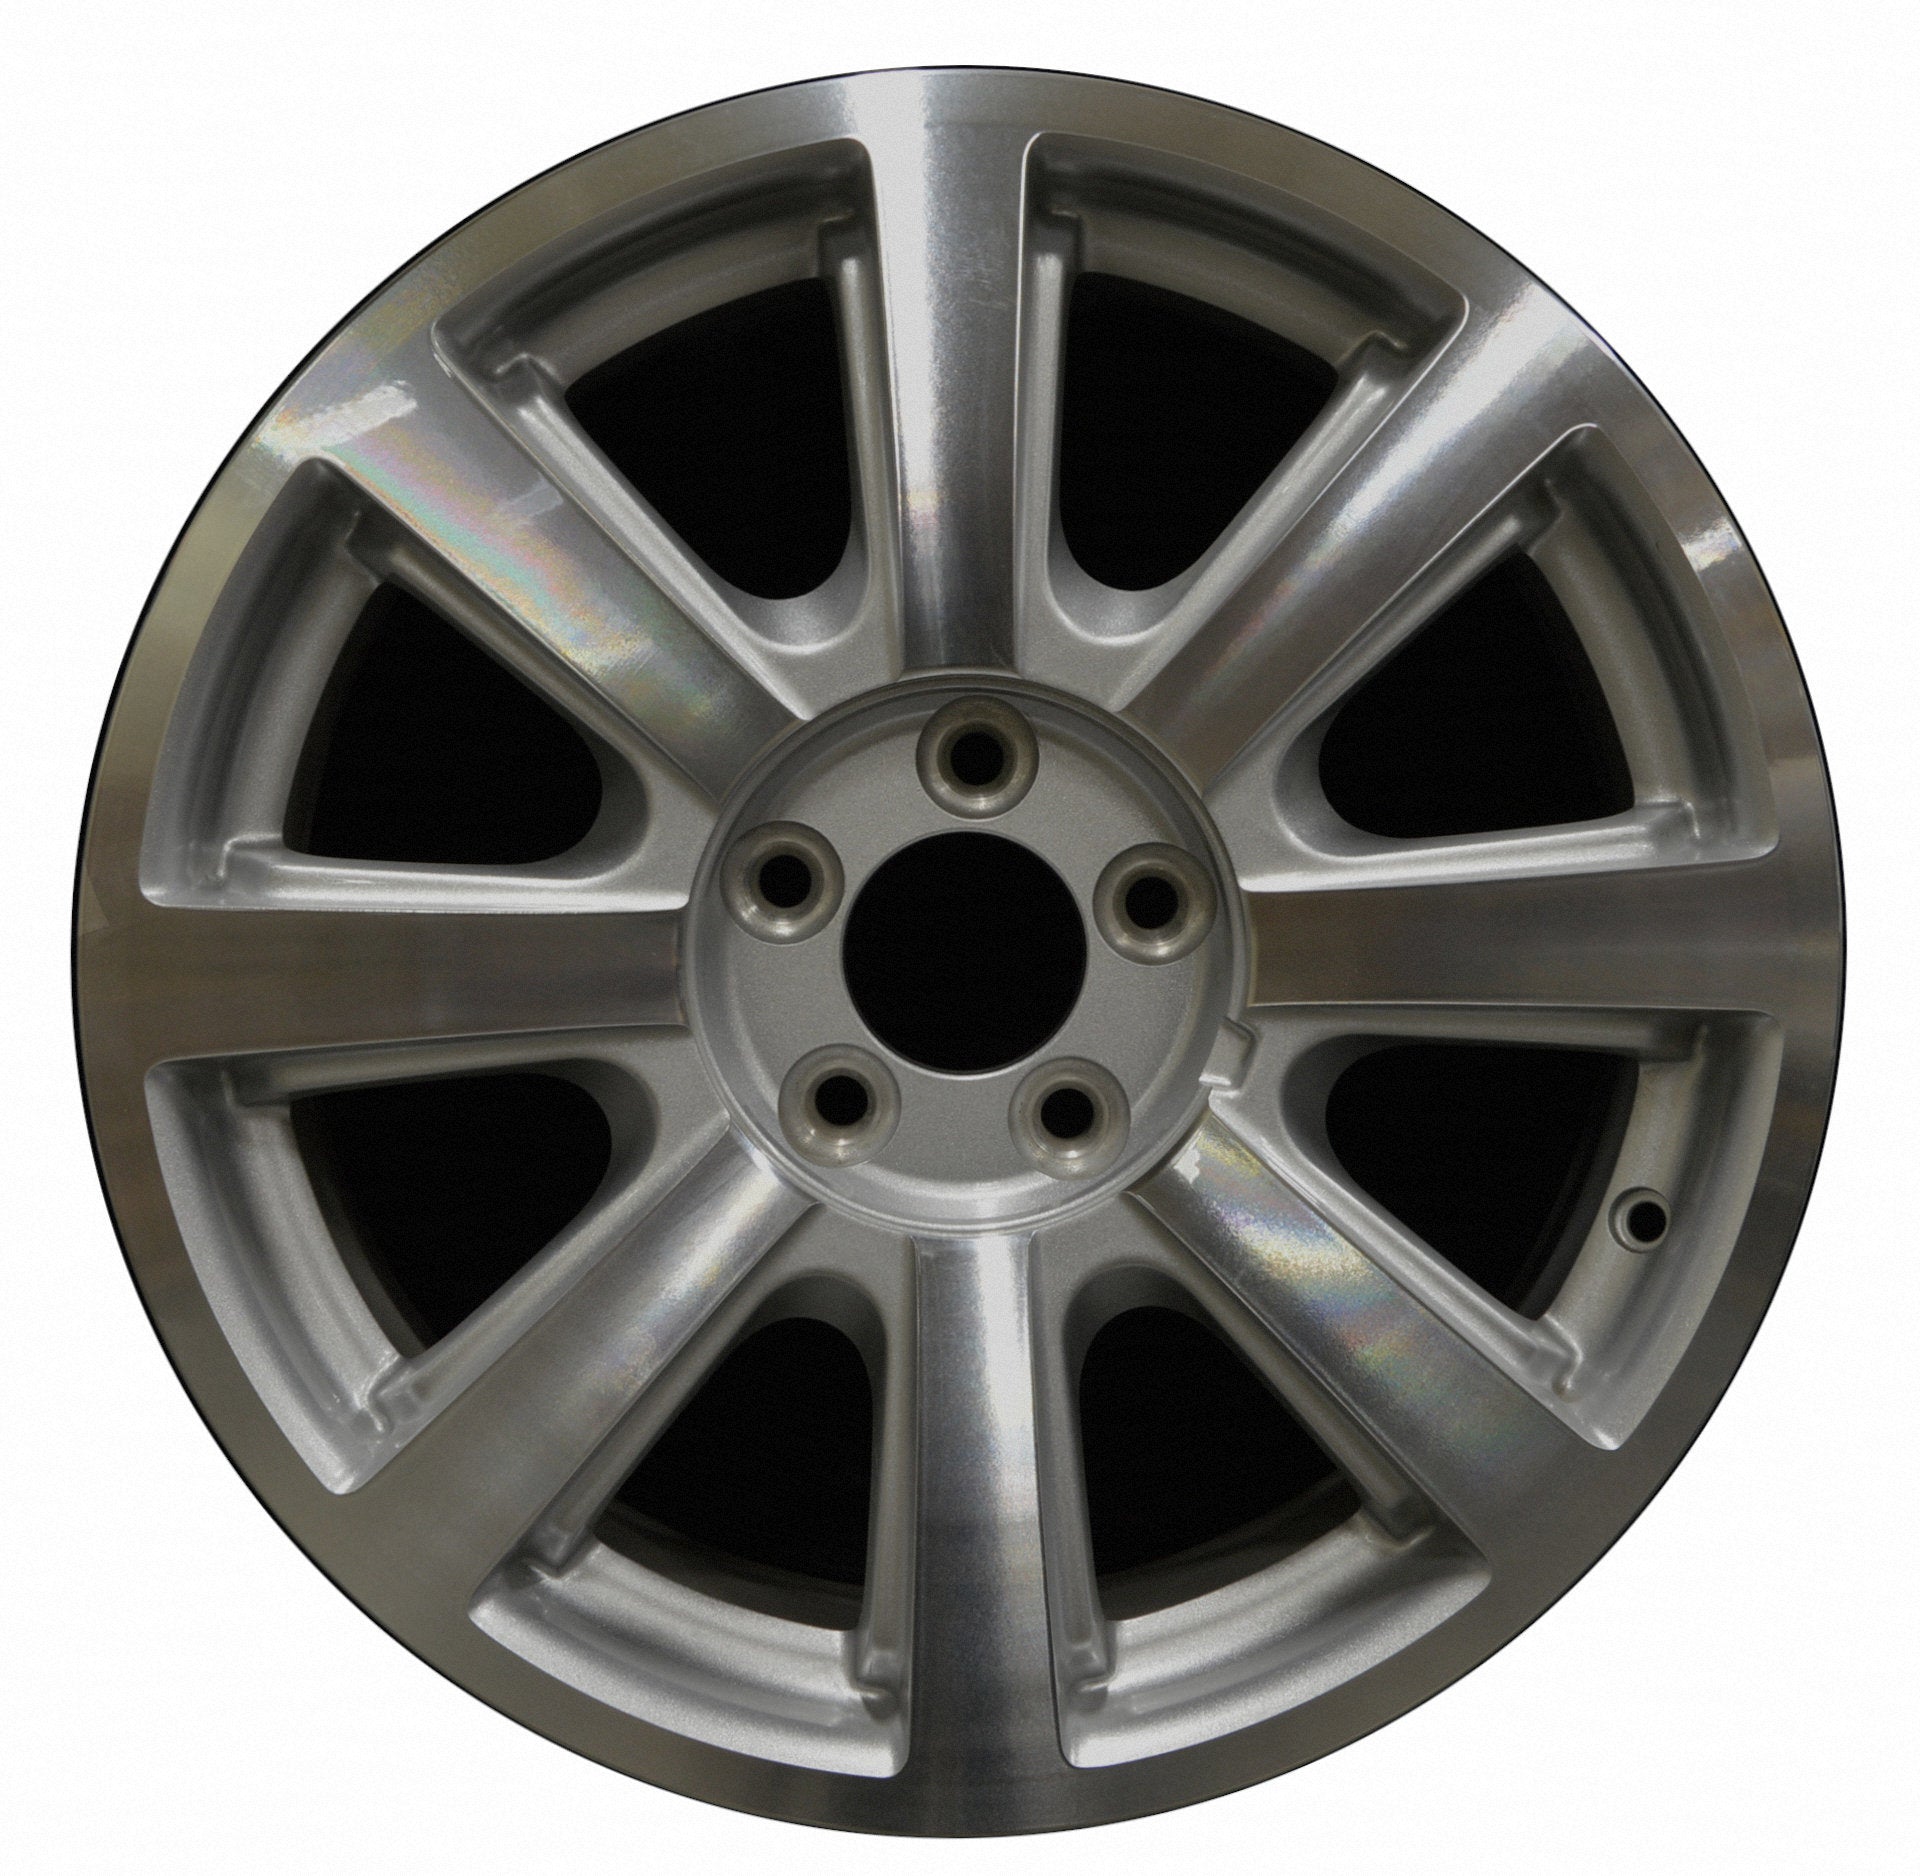 Lincoln MKX  2007, 2008, 2009, 2010 Factory OEM Car Wheel Size 18x7.5 Alloy WAO.3676.PS02.MA